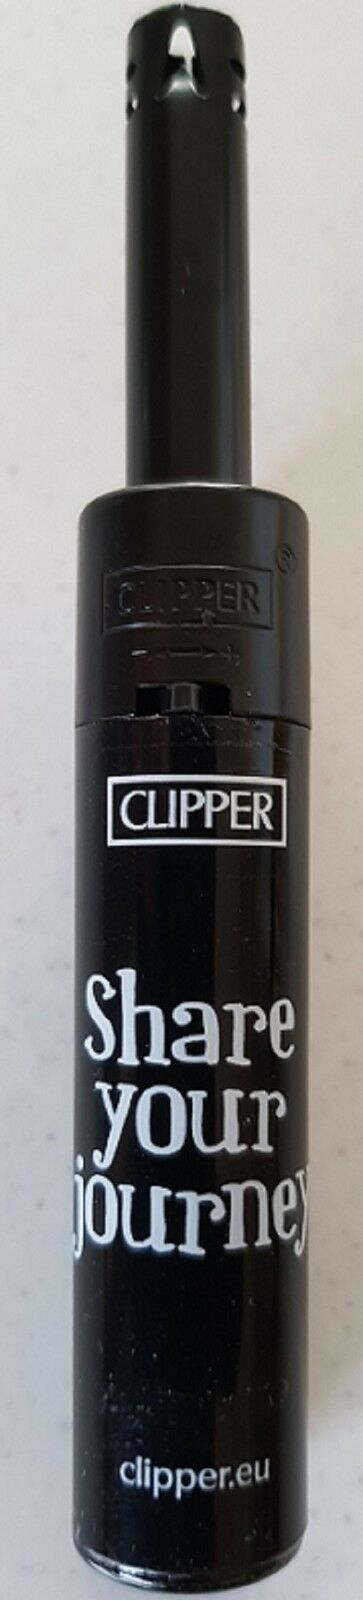 Clipper mini tube refillable electronic utility lighter Clipper quality  share